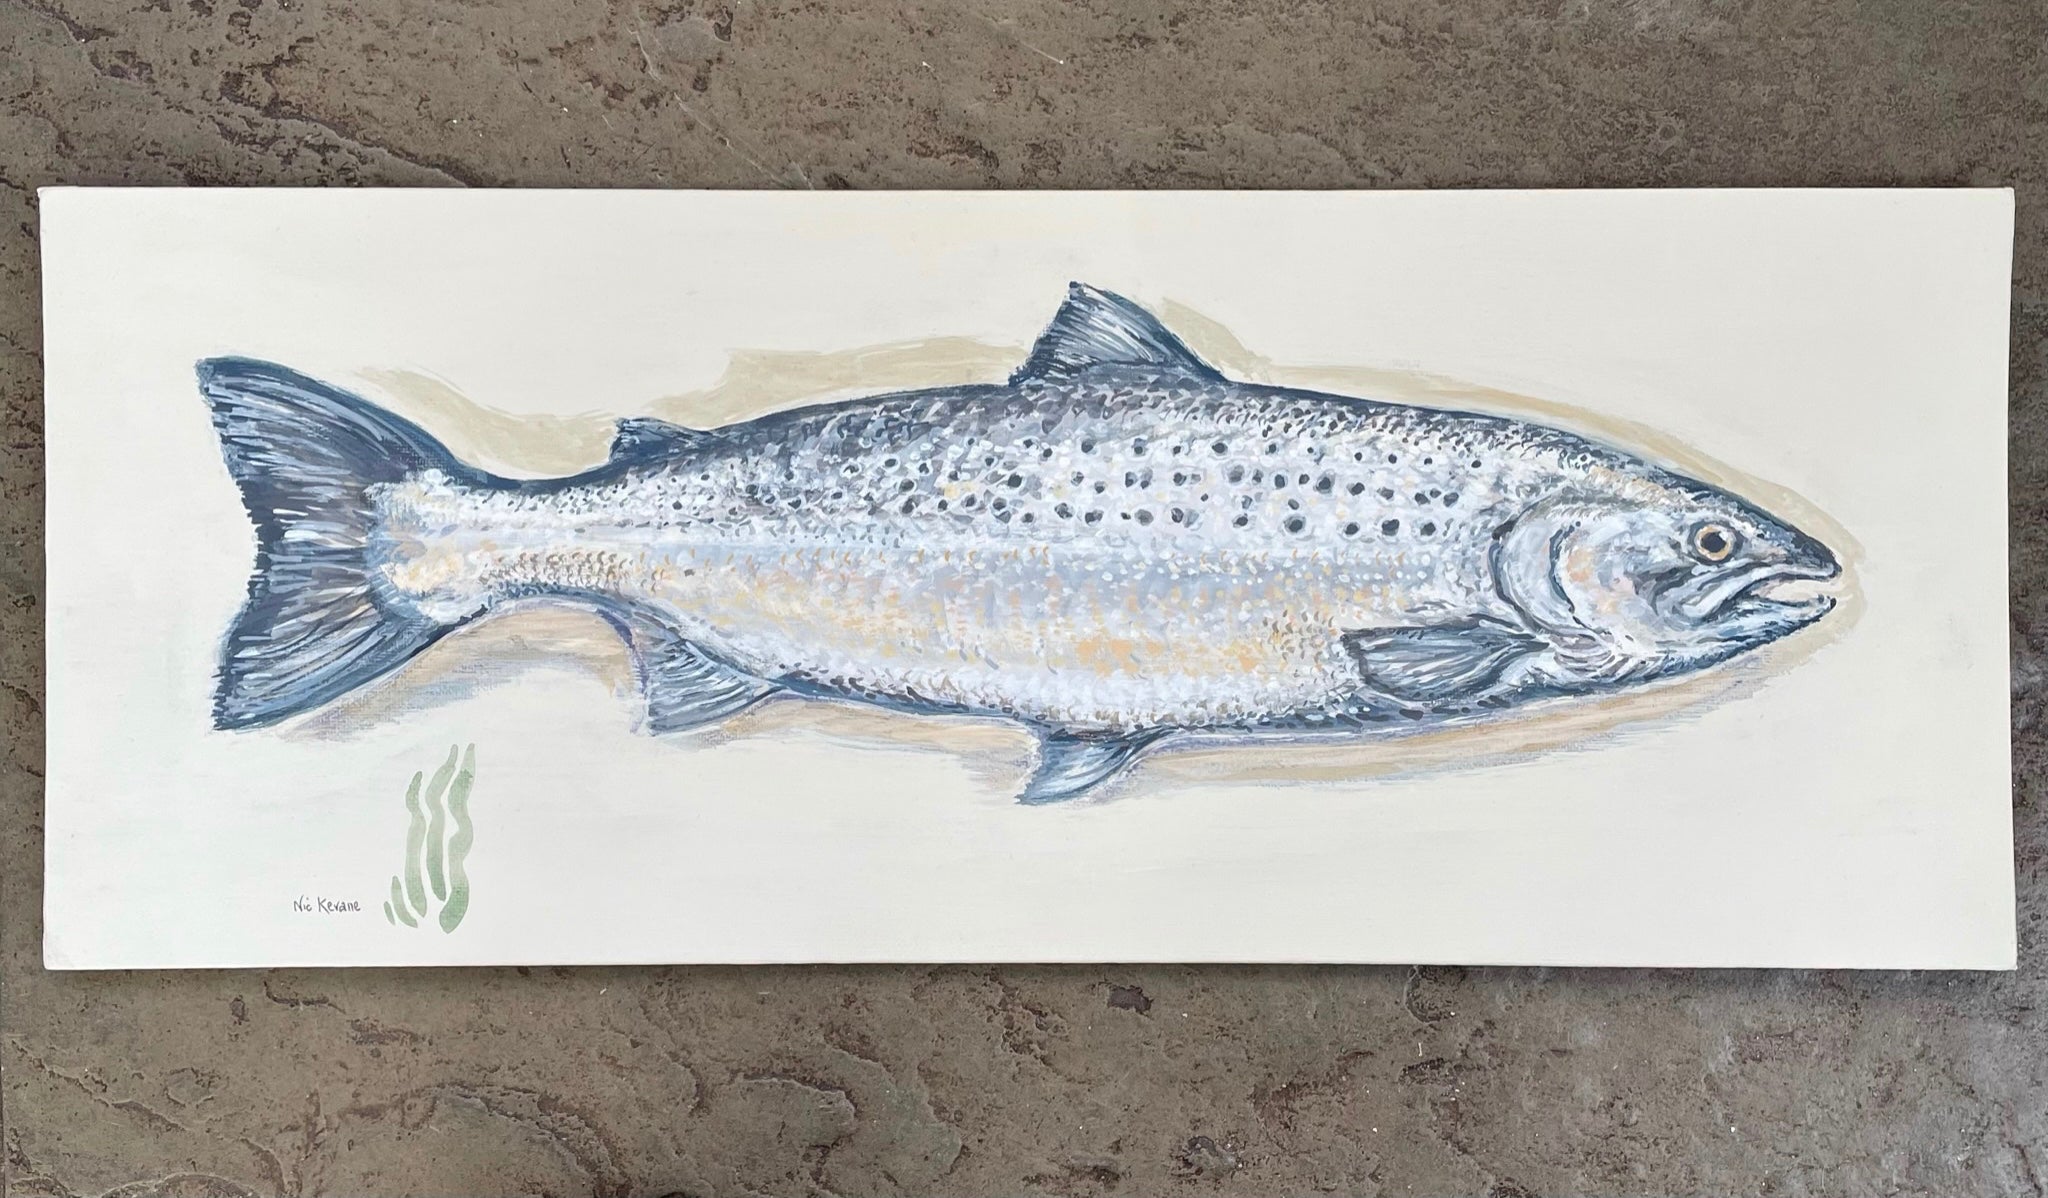 Salmon.  This painting is reminiscent of the traditional taxidermy fish displayed in a glass fronted case, often seen in country houses and fieldsports lodges.